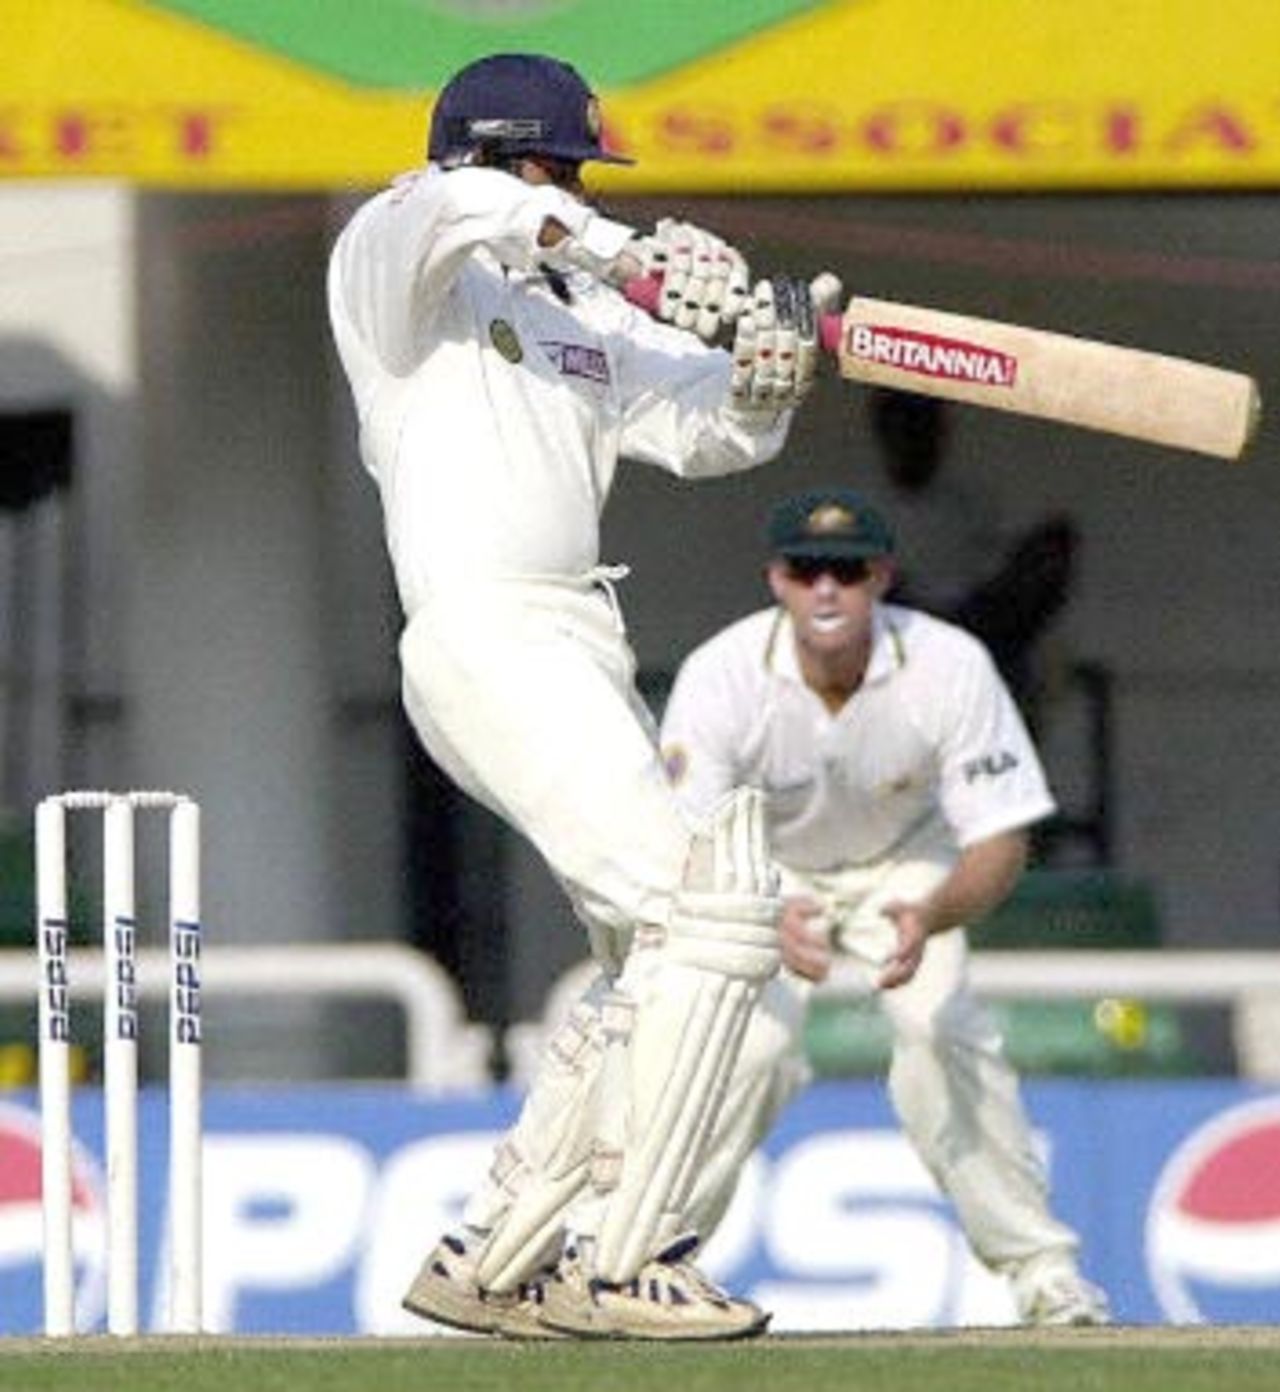 Indian opening batsman S. Ramesh (L) hits a ball to boundary during the first day's play of the first three-day cricket match against Australia in Nagpur, 17 February 2001. India were at 71 for 1 at the end of day's play in reply to Australia's 291.